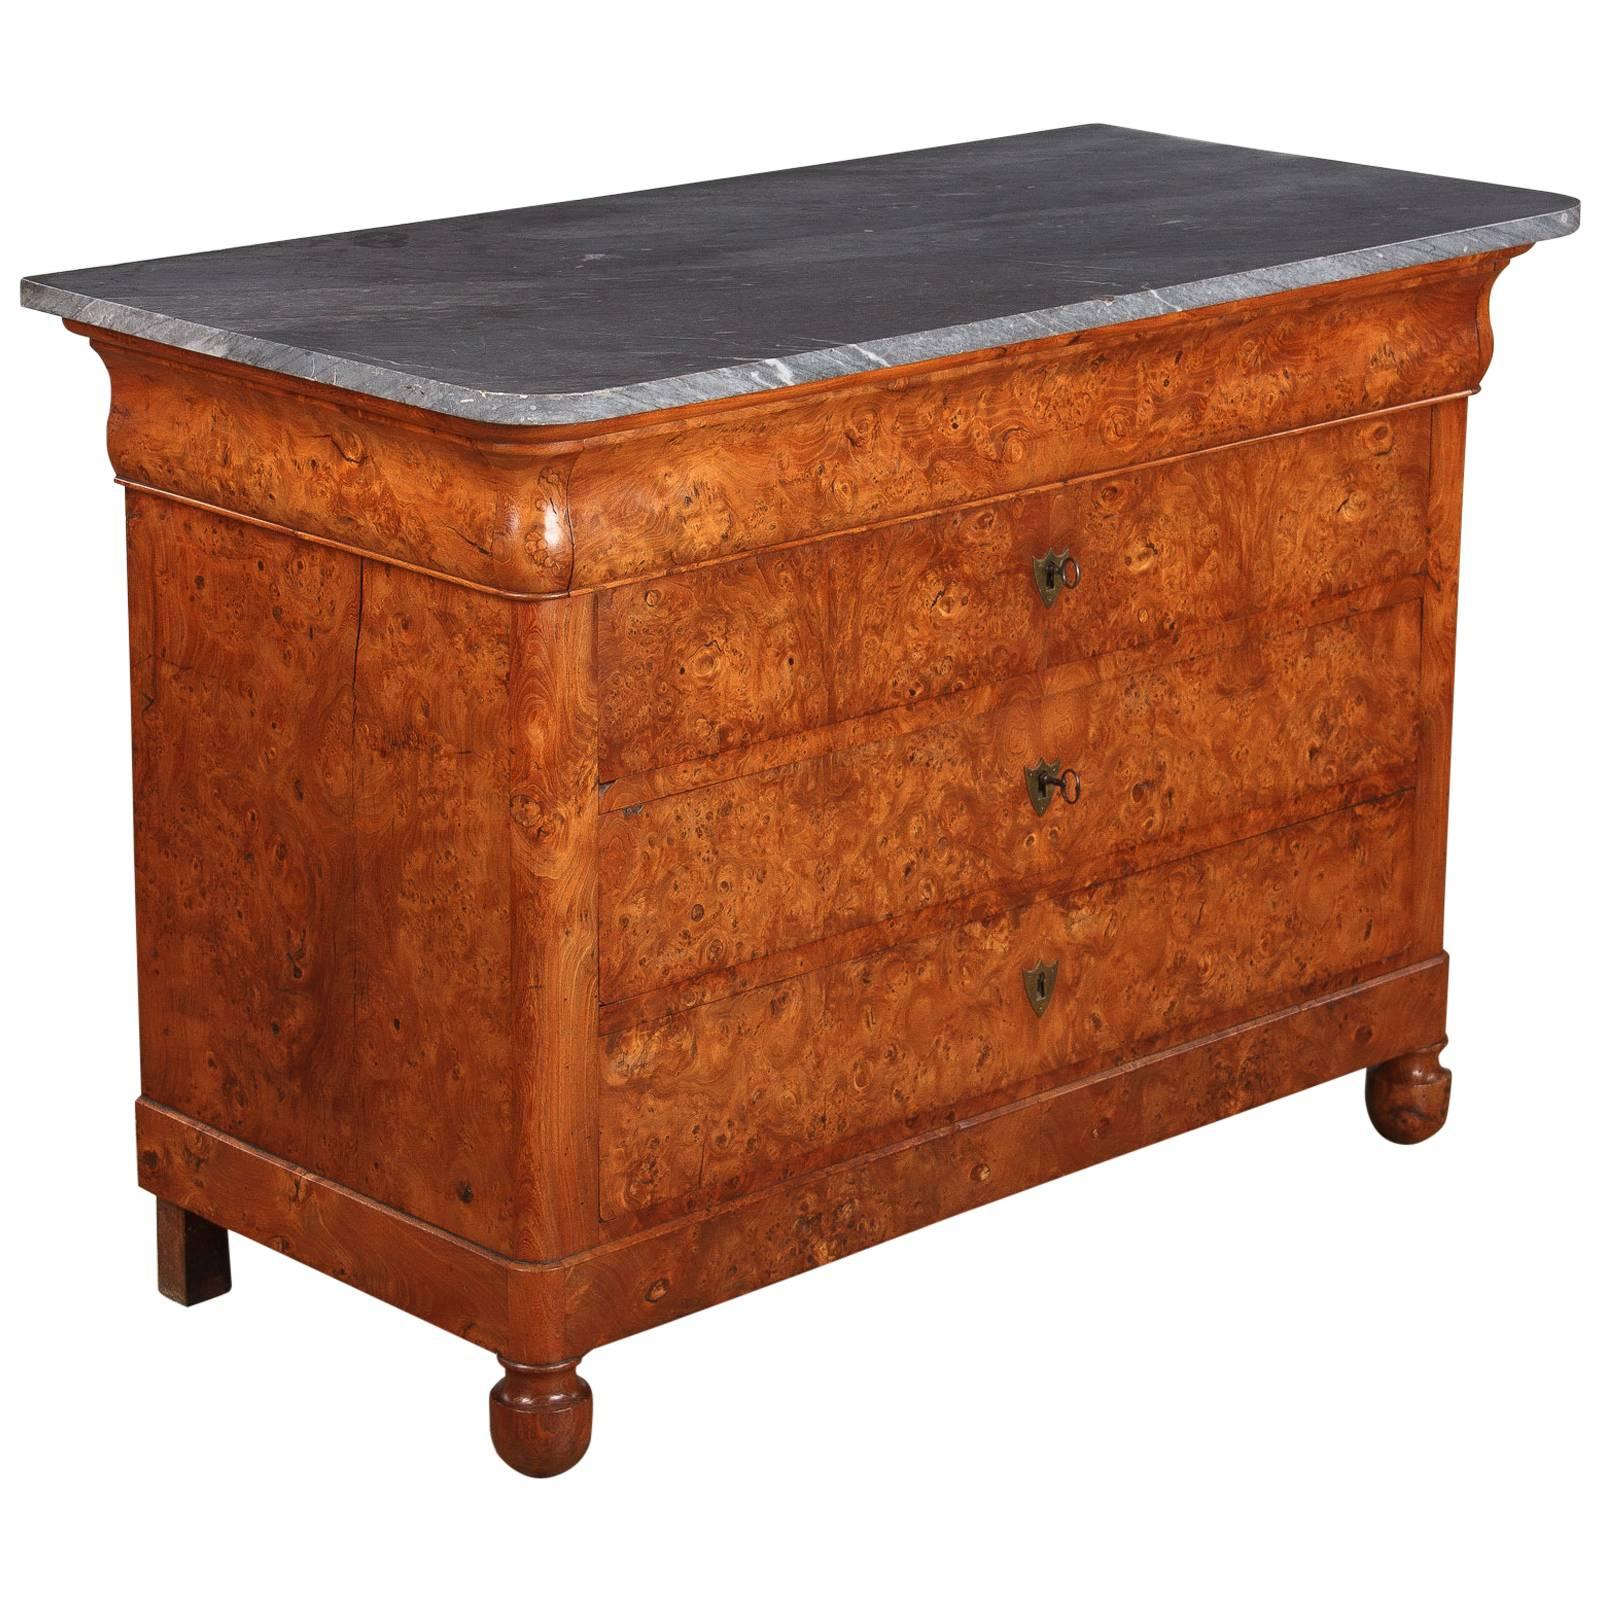 French Restauration Chest of Drawers with Marble Top, Early 1800s